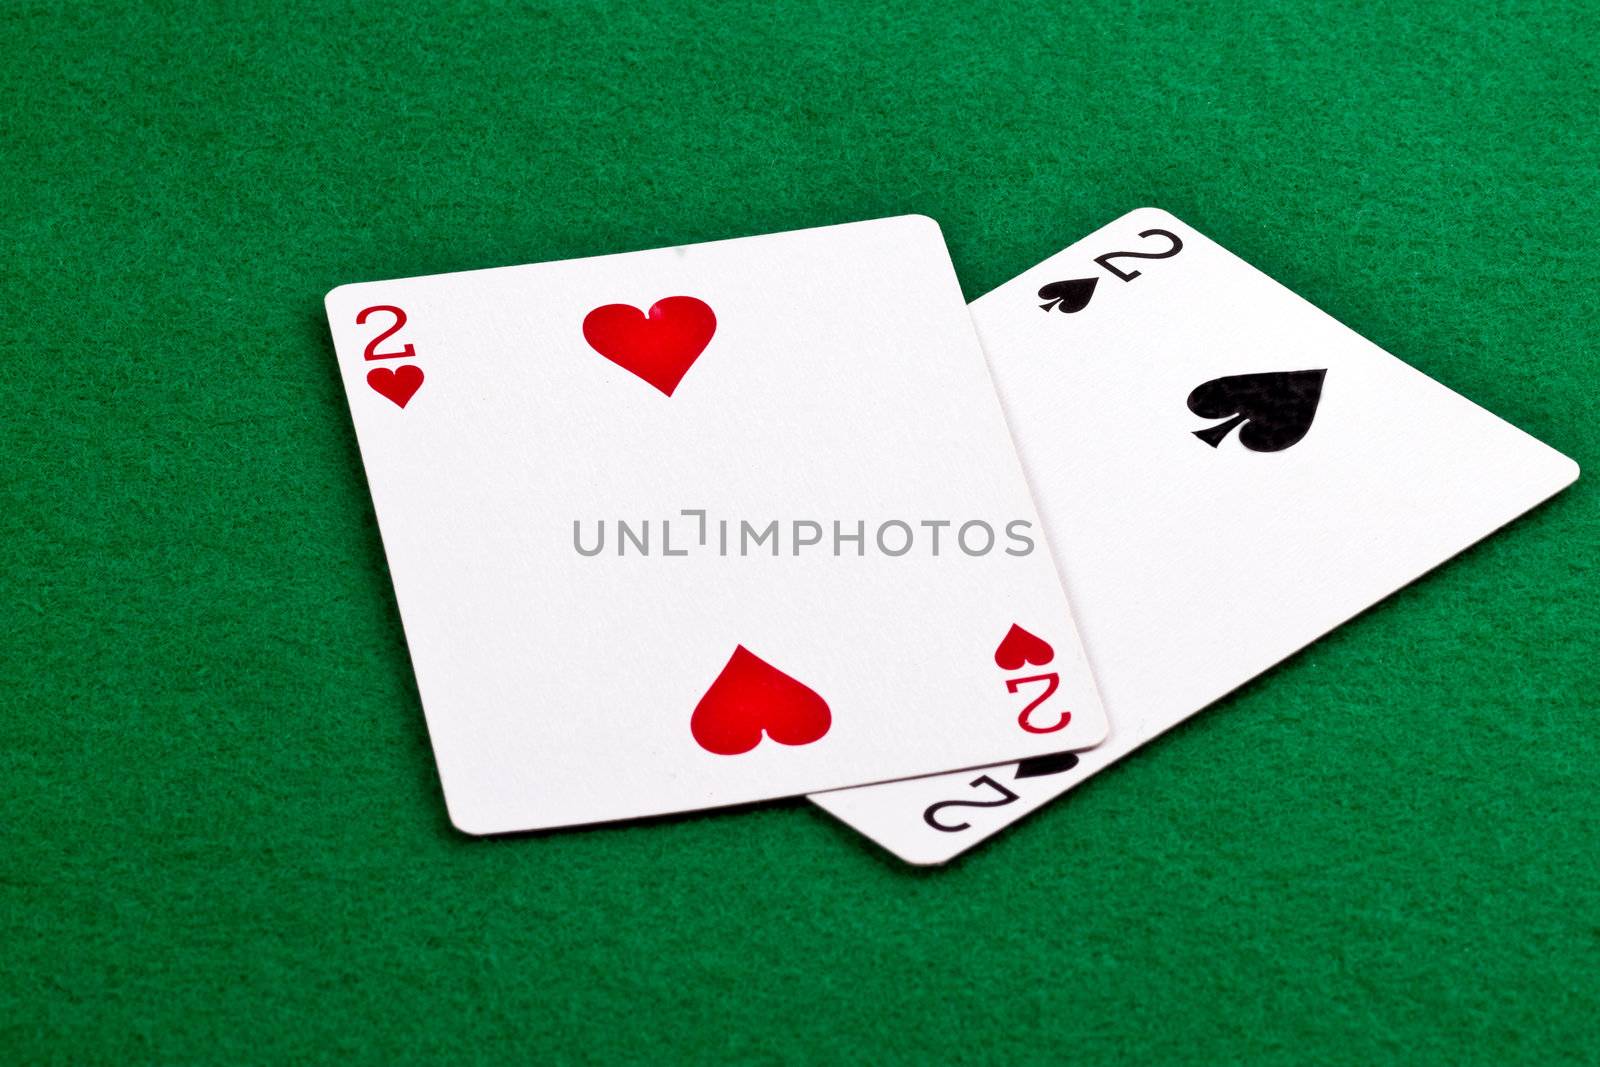 Poker hand with a pair of deuces on green felt